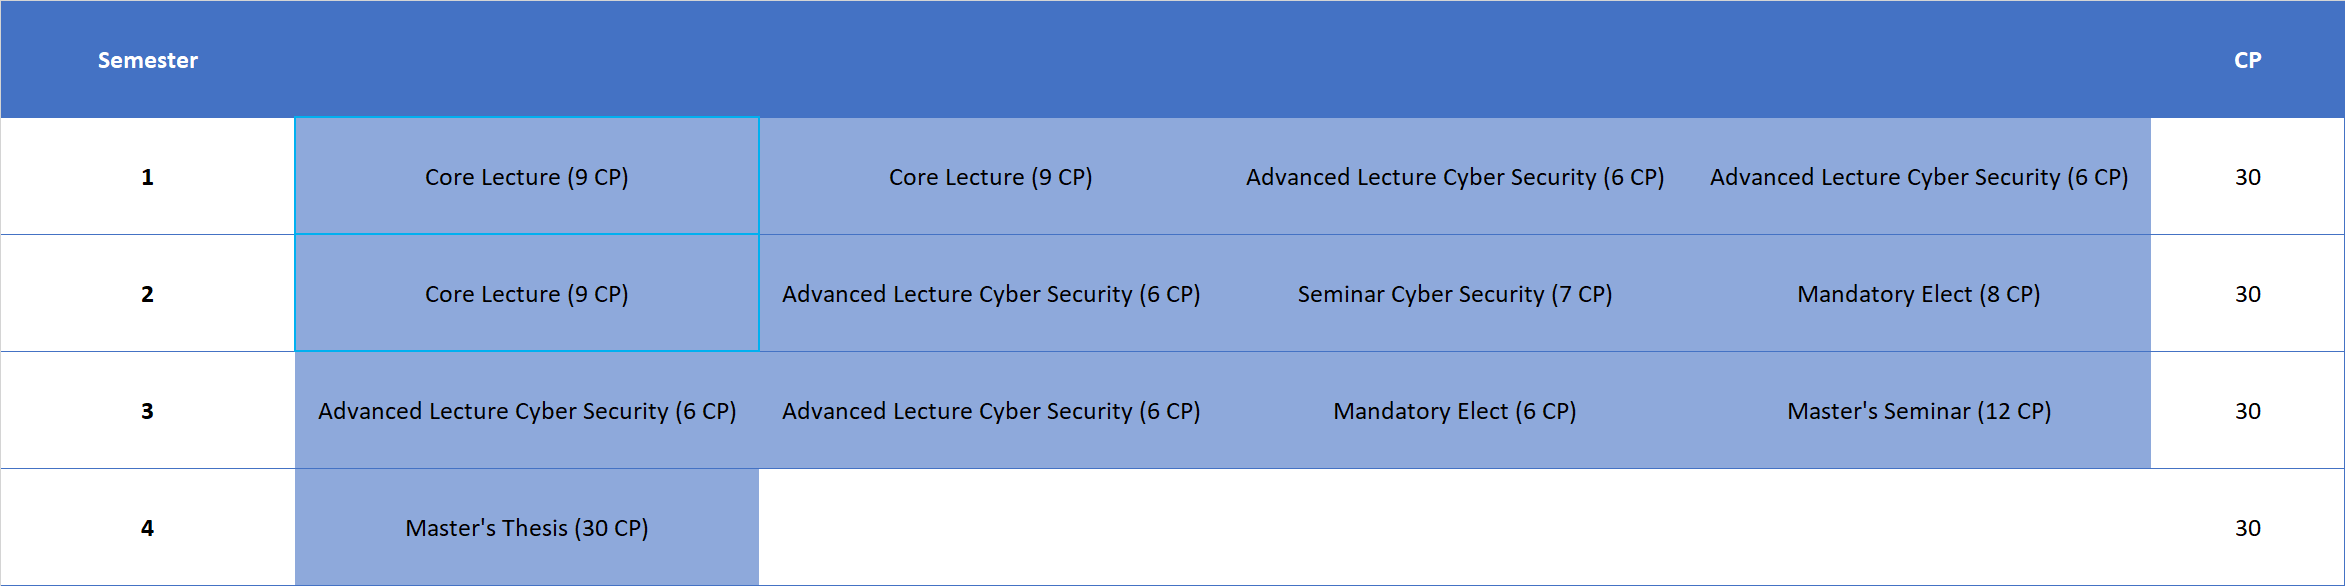 Example Schedule for Students with a Bachelor's Degree in Cybersecurity